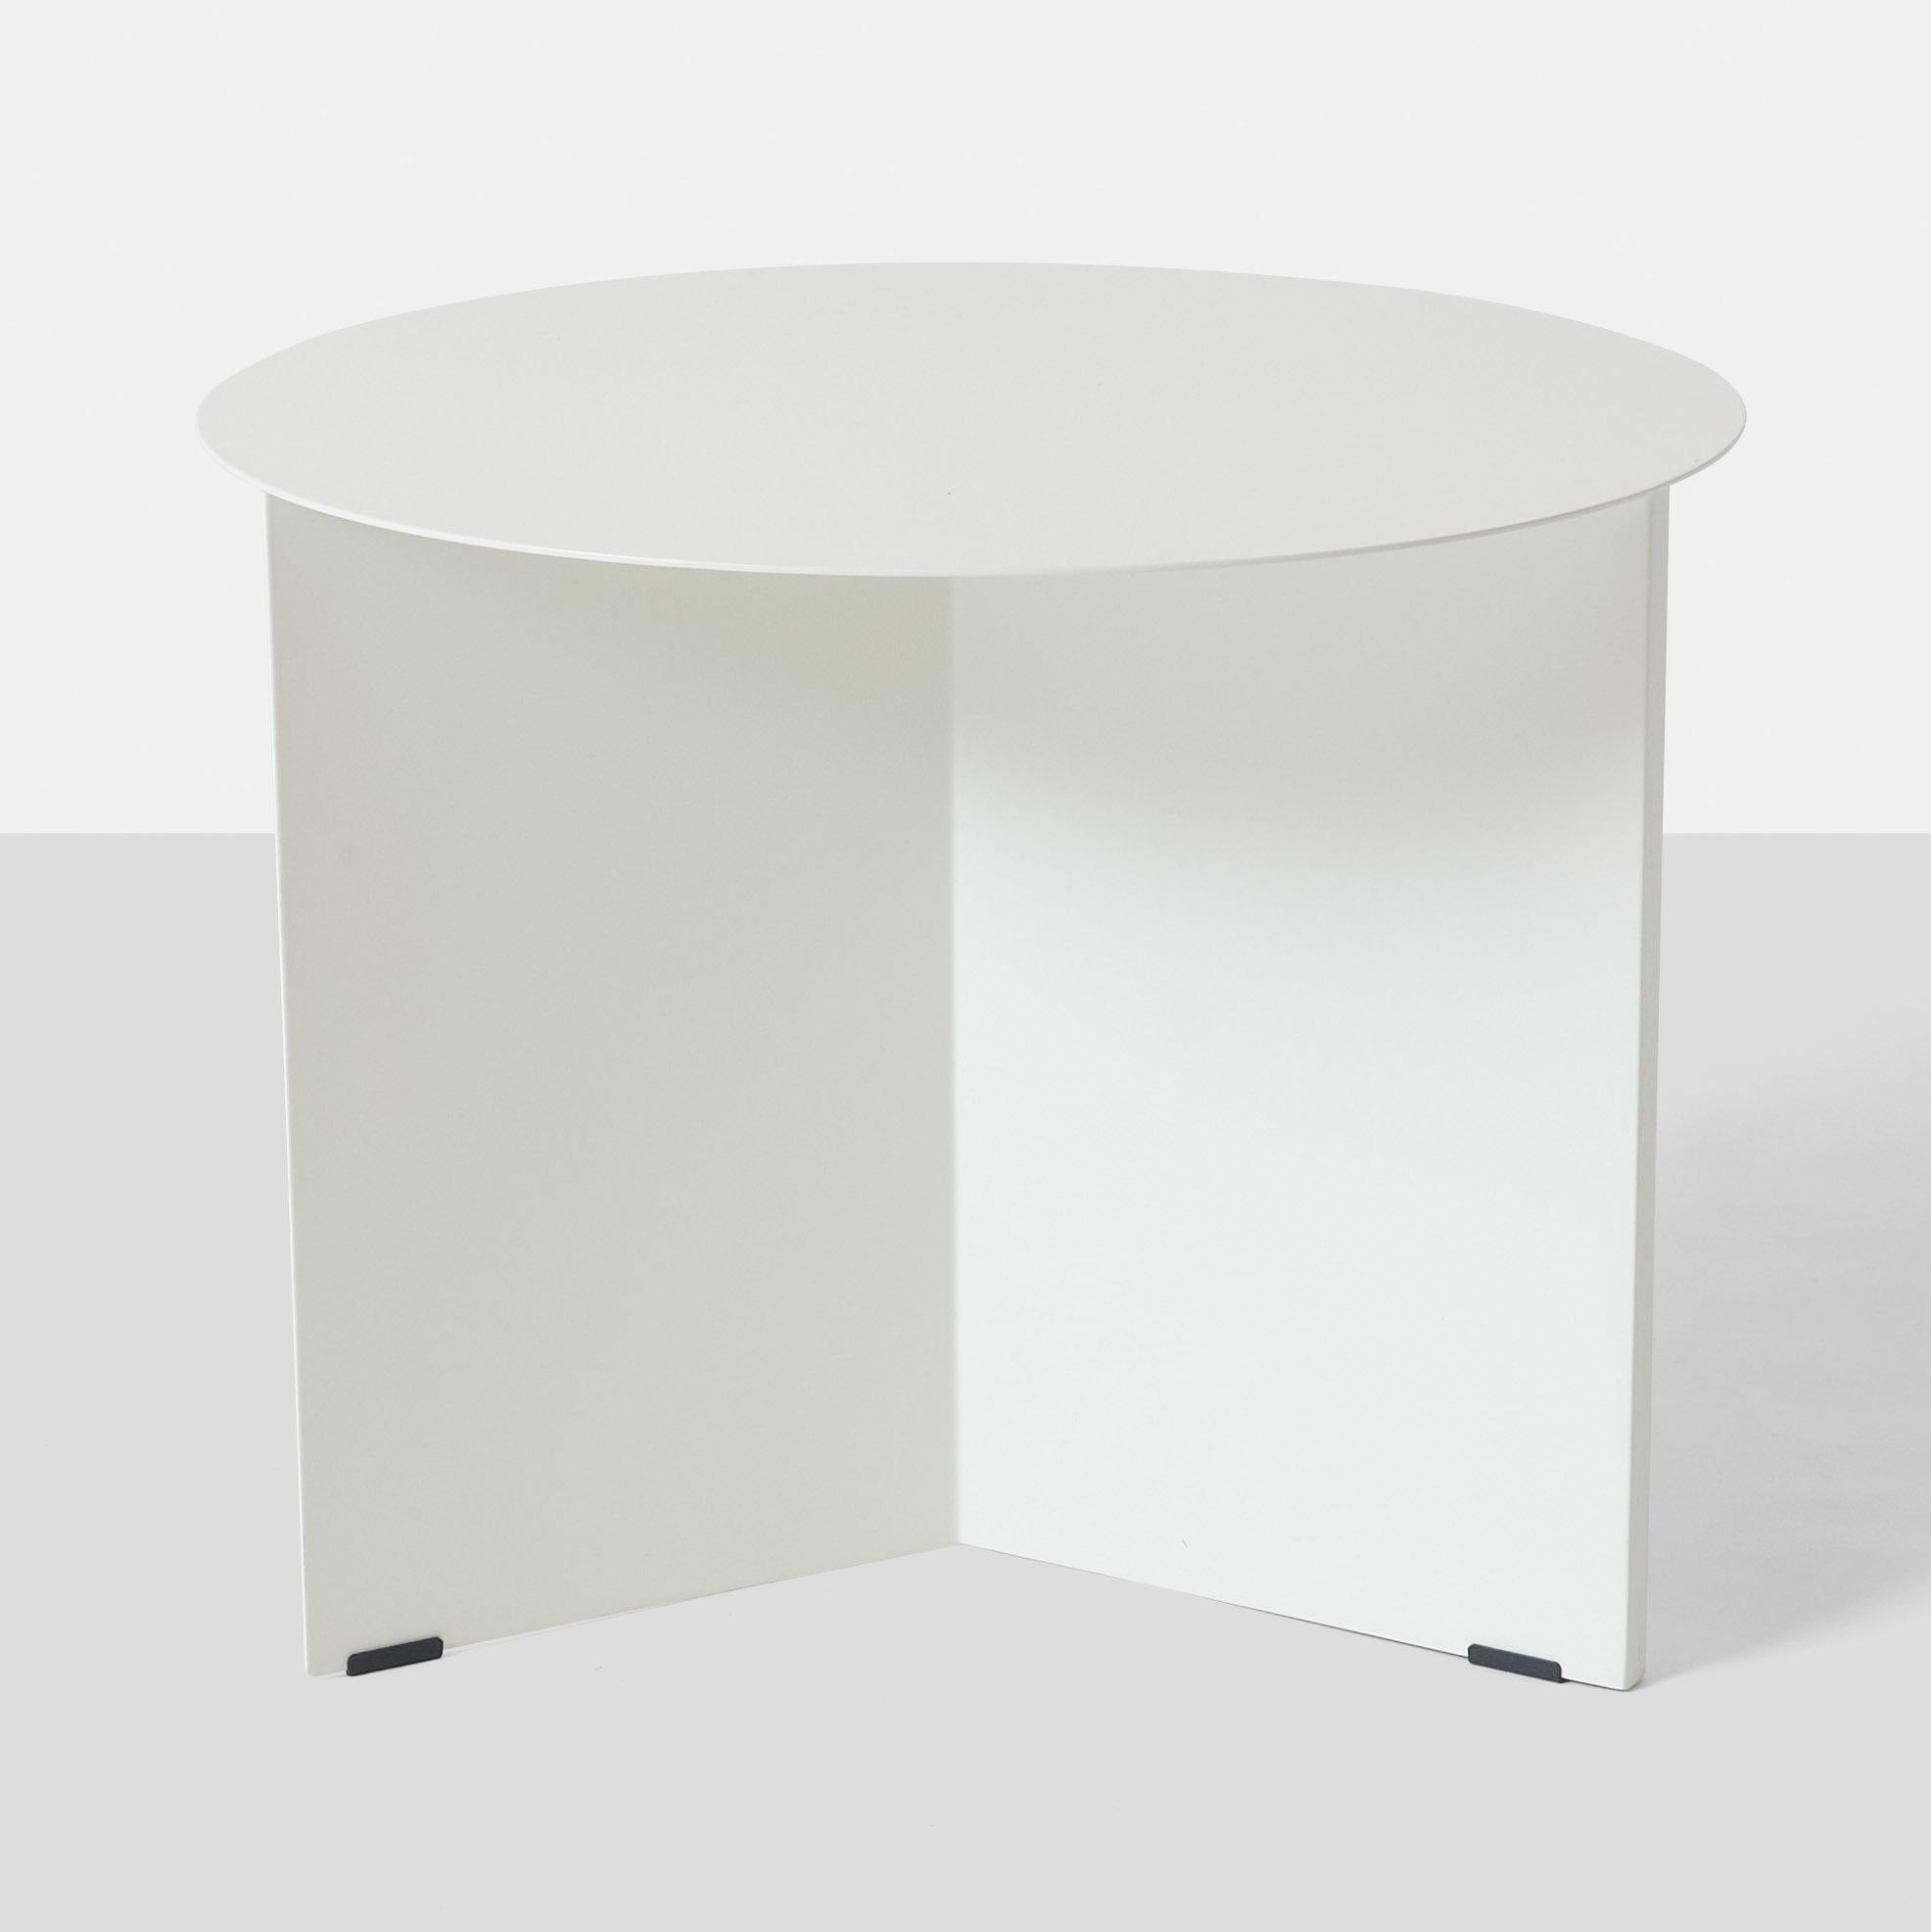 A white powder coated steel round slit table by AIsko-Berlin for HAY. This origami-inspired design is named after the slit that emerges when the plate frame is folded underneath the table top.